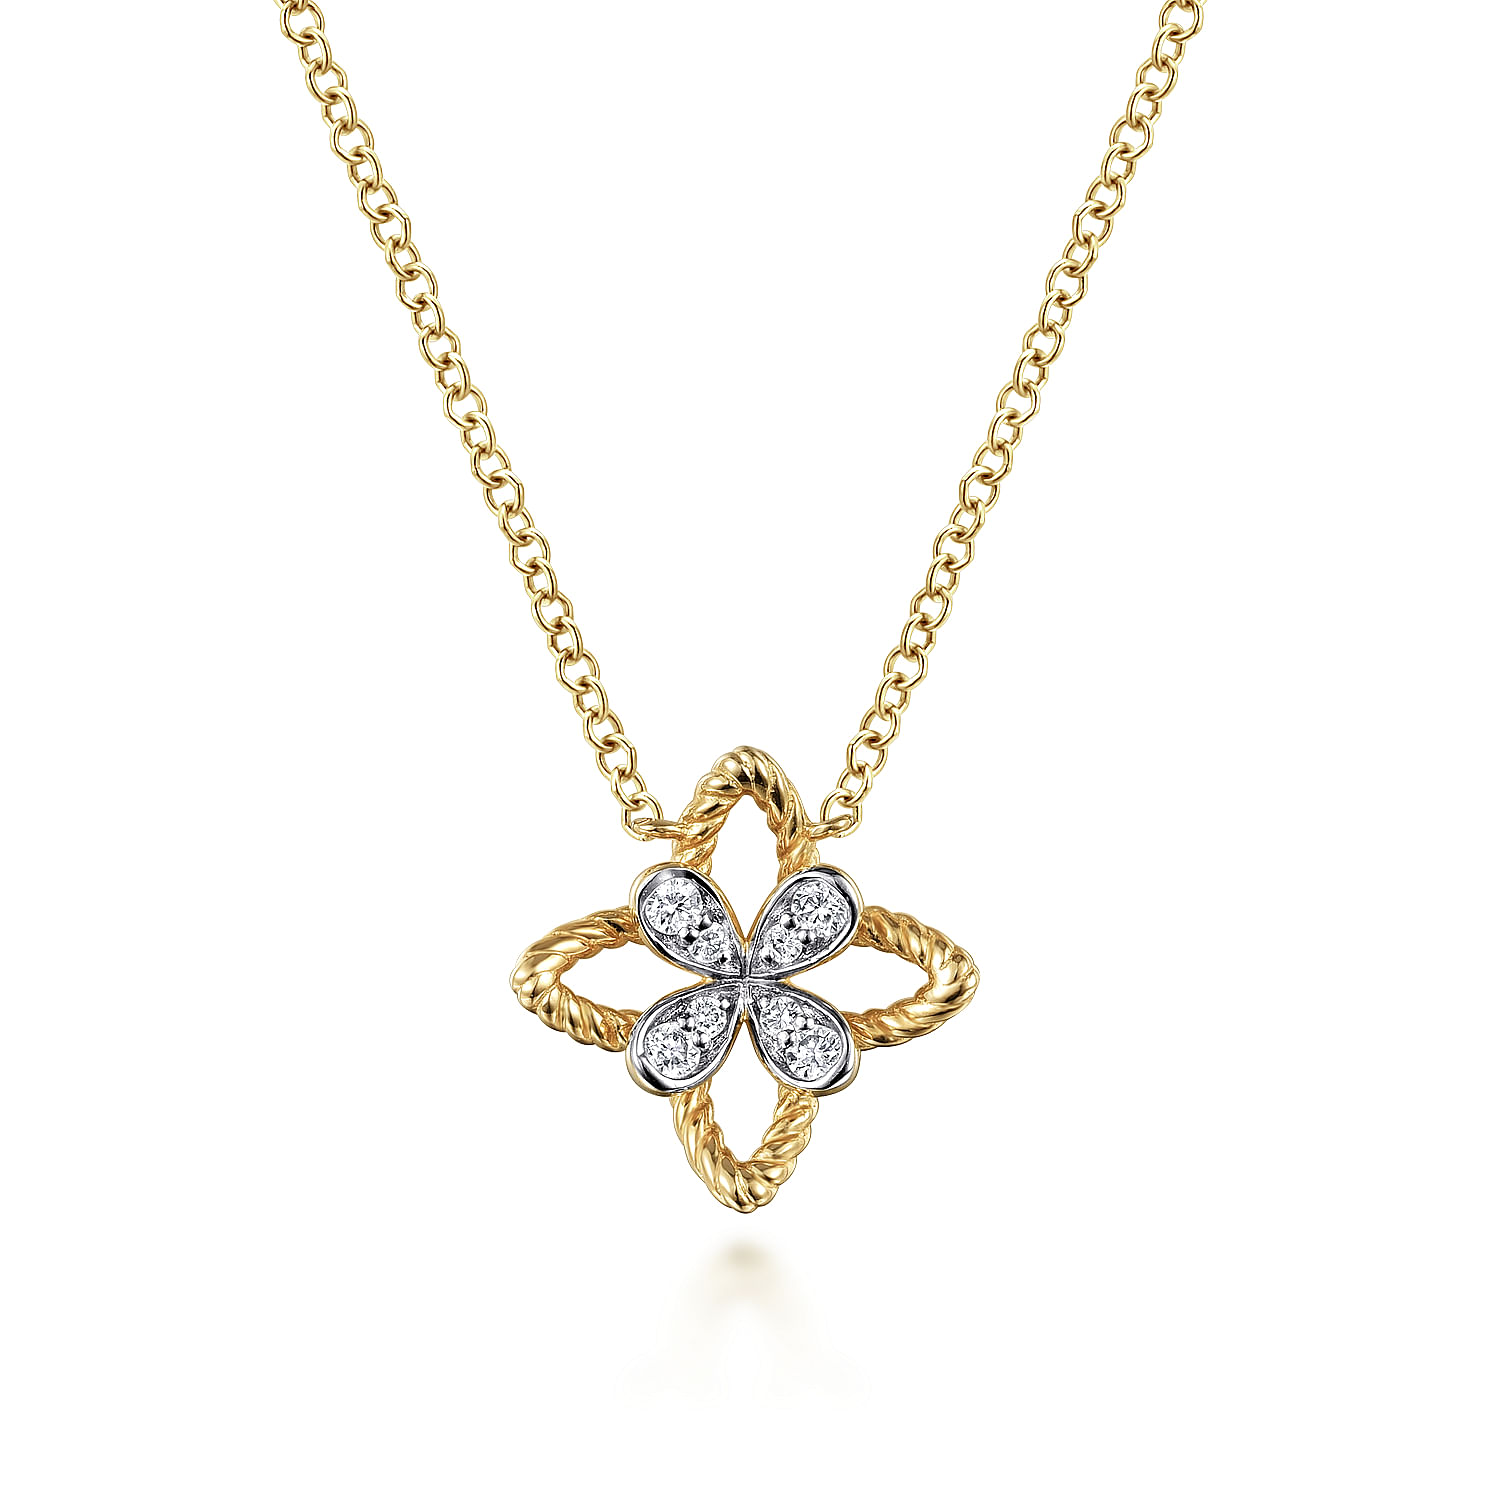 Gabriel - 14K Yellow Gold Twisted Rope Clover Pendant Necklace with Diamond Petals